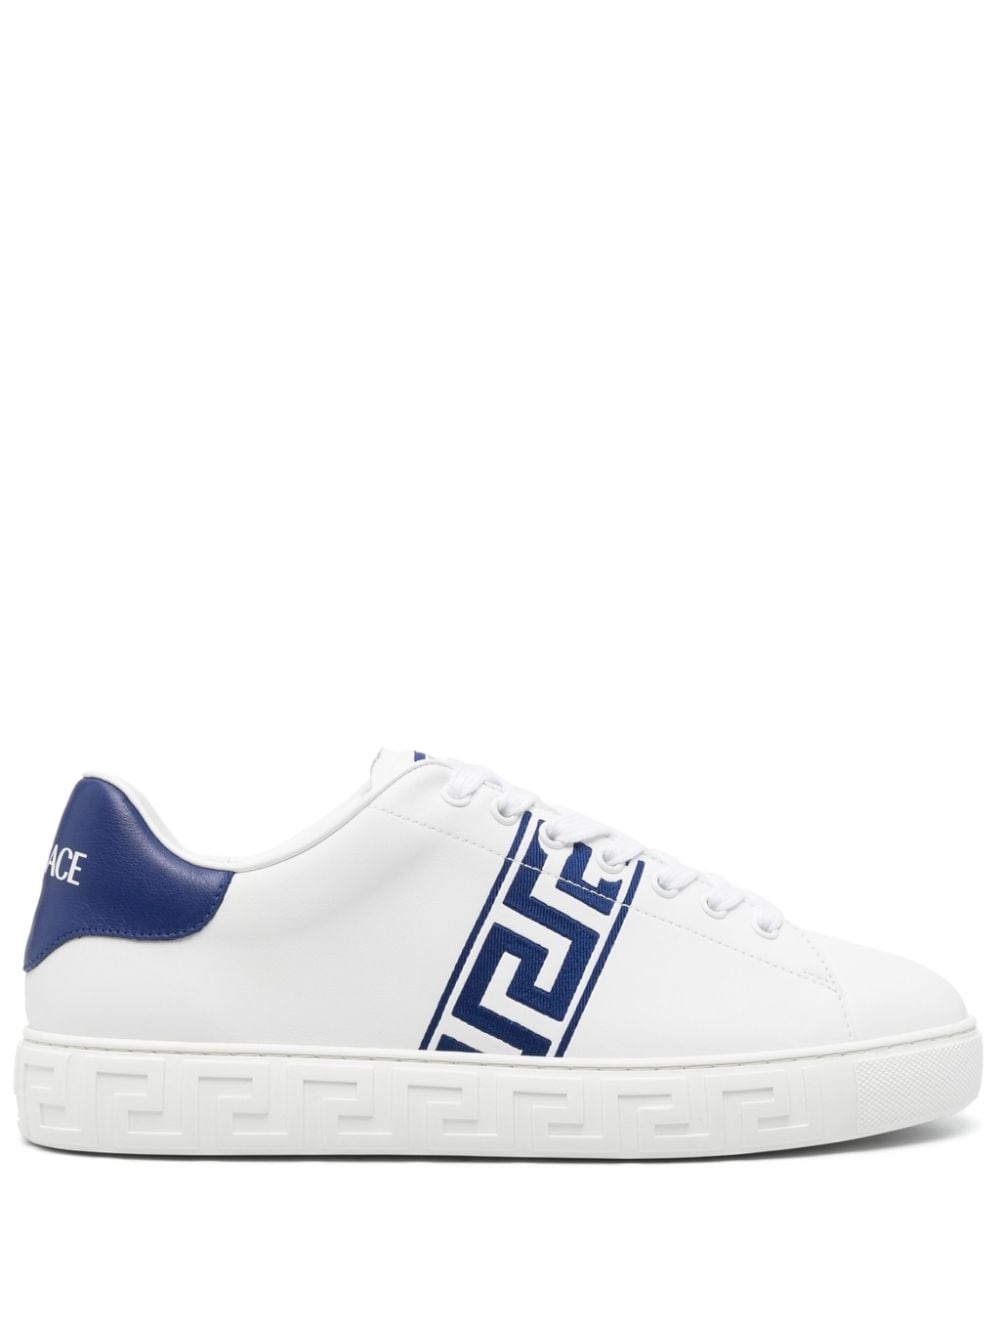 Greca-embroidery leather sneakers - 1